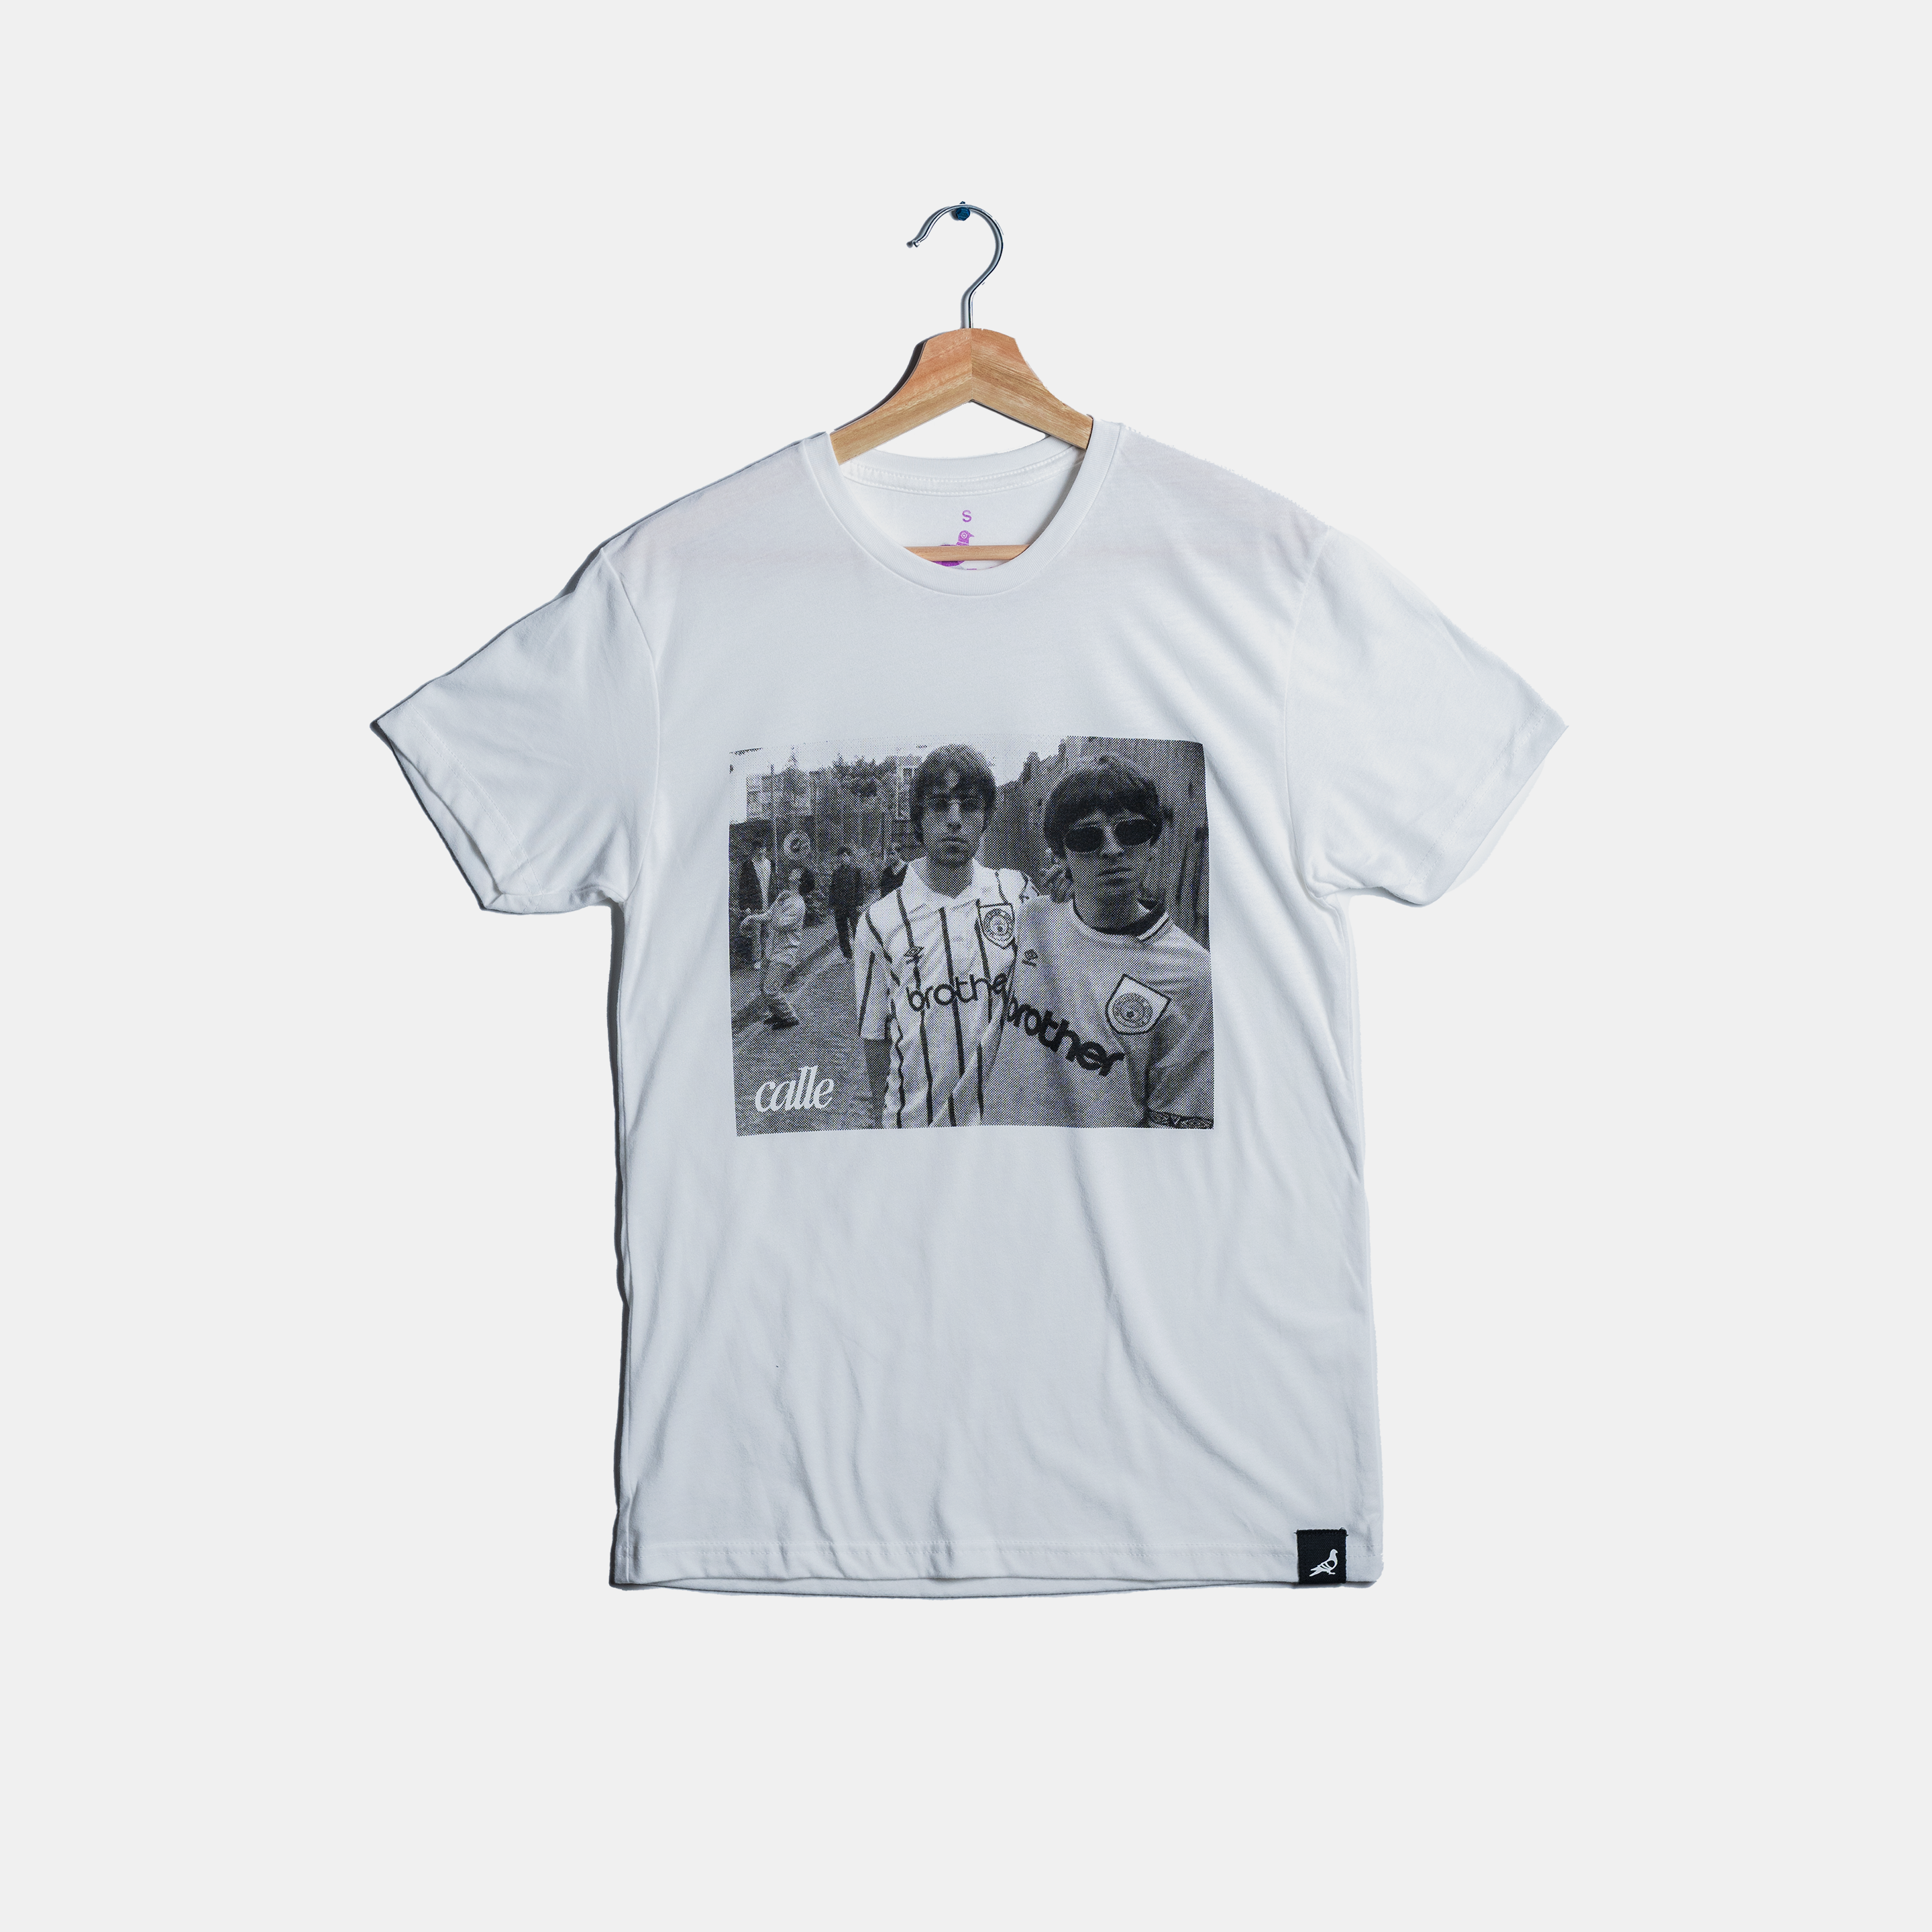 Oasis Tee - Limited Edition